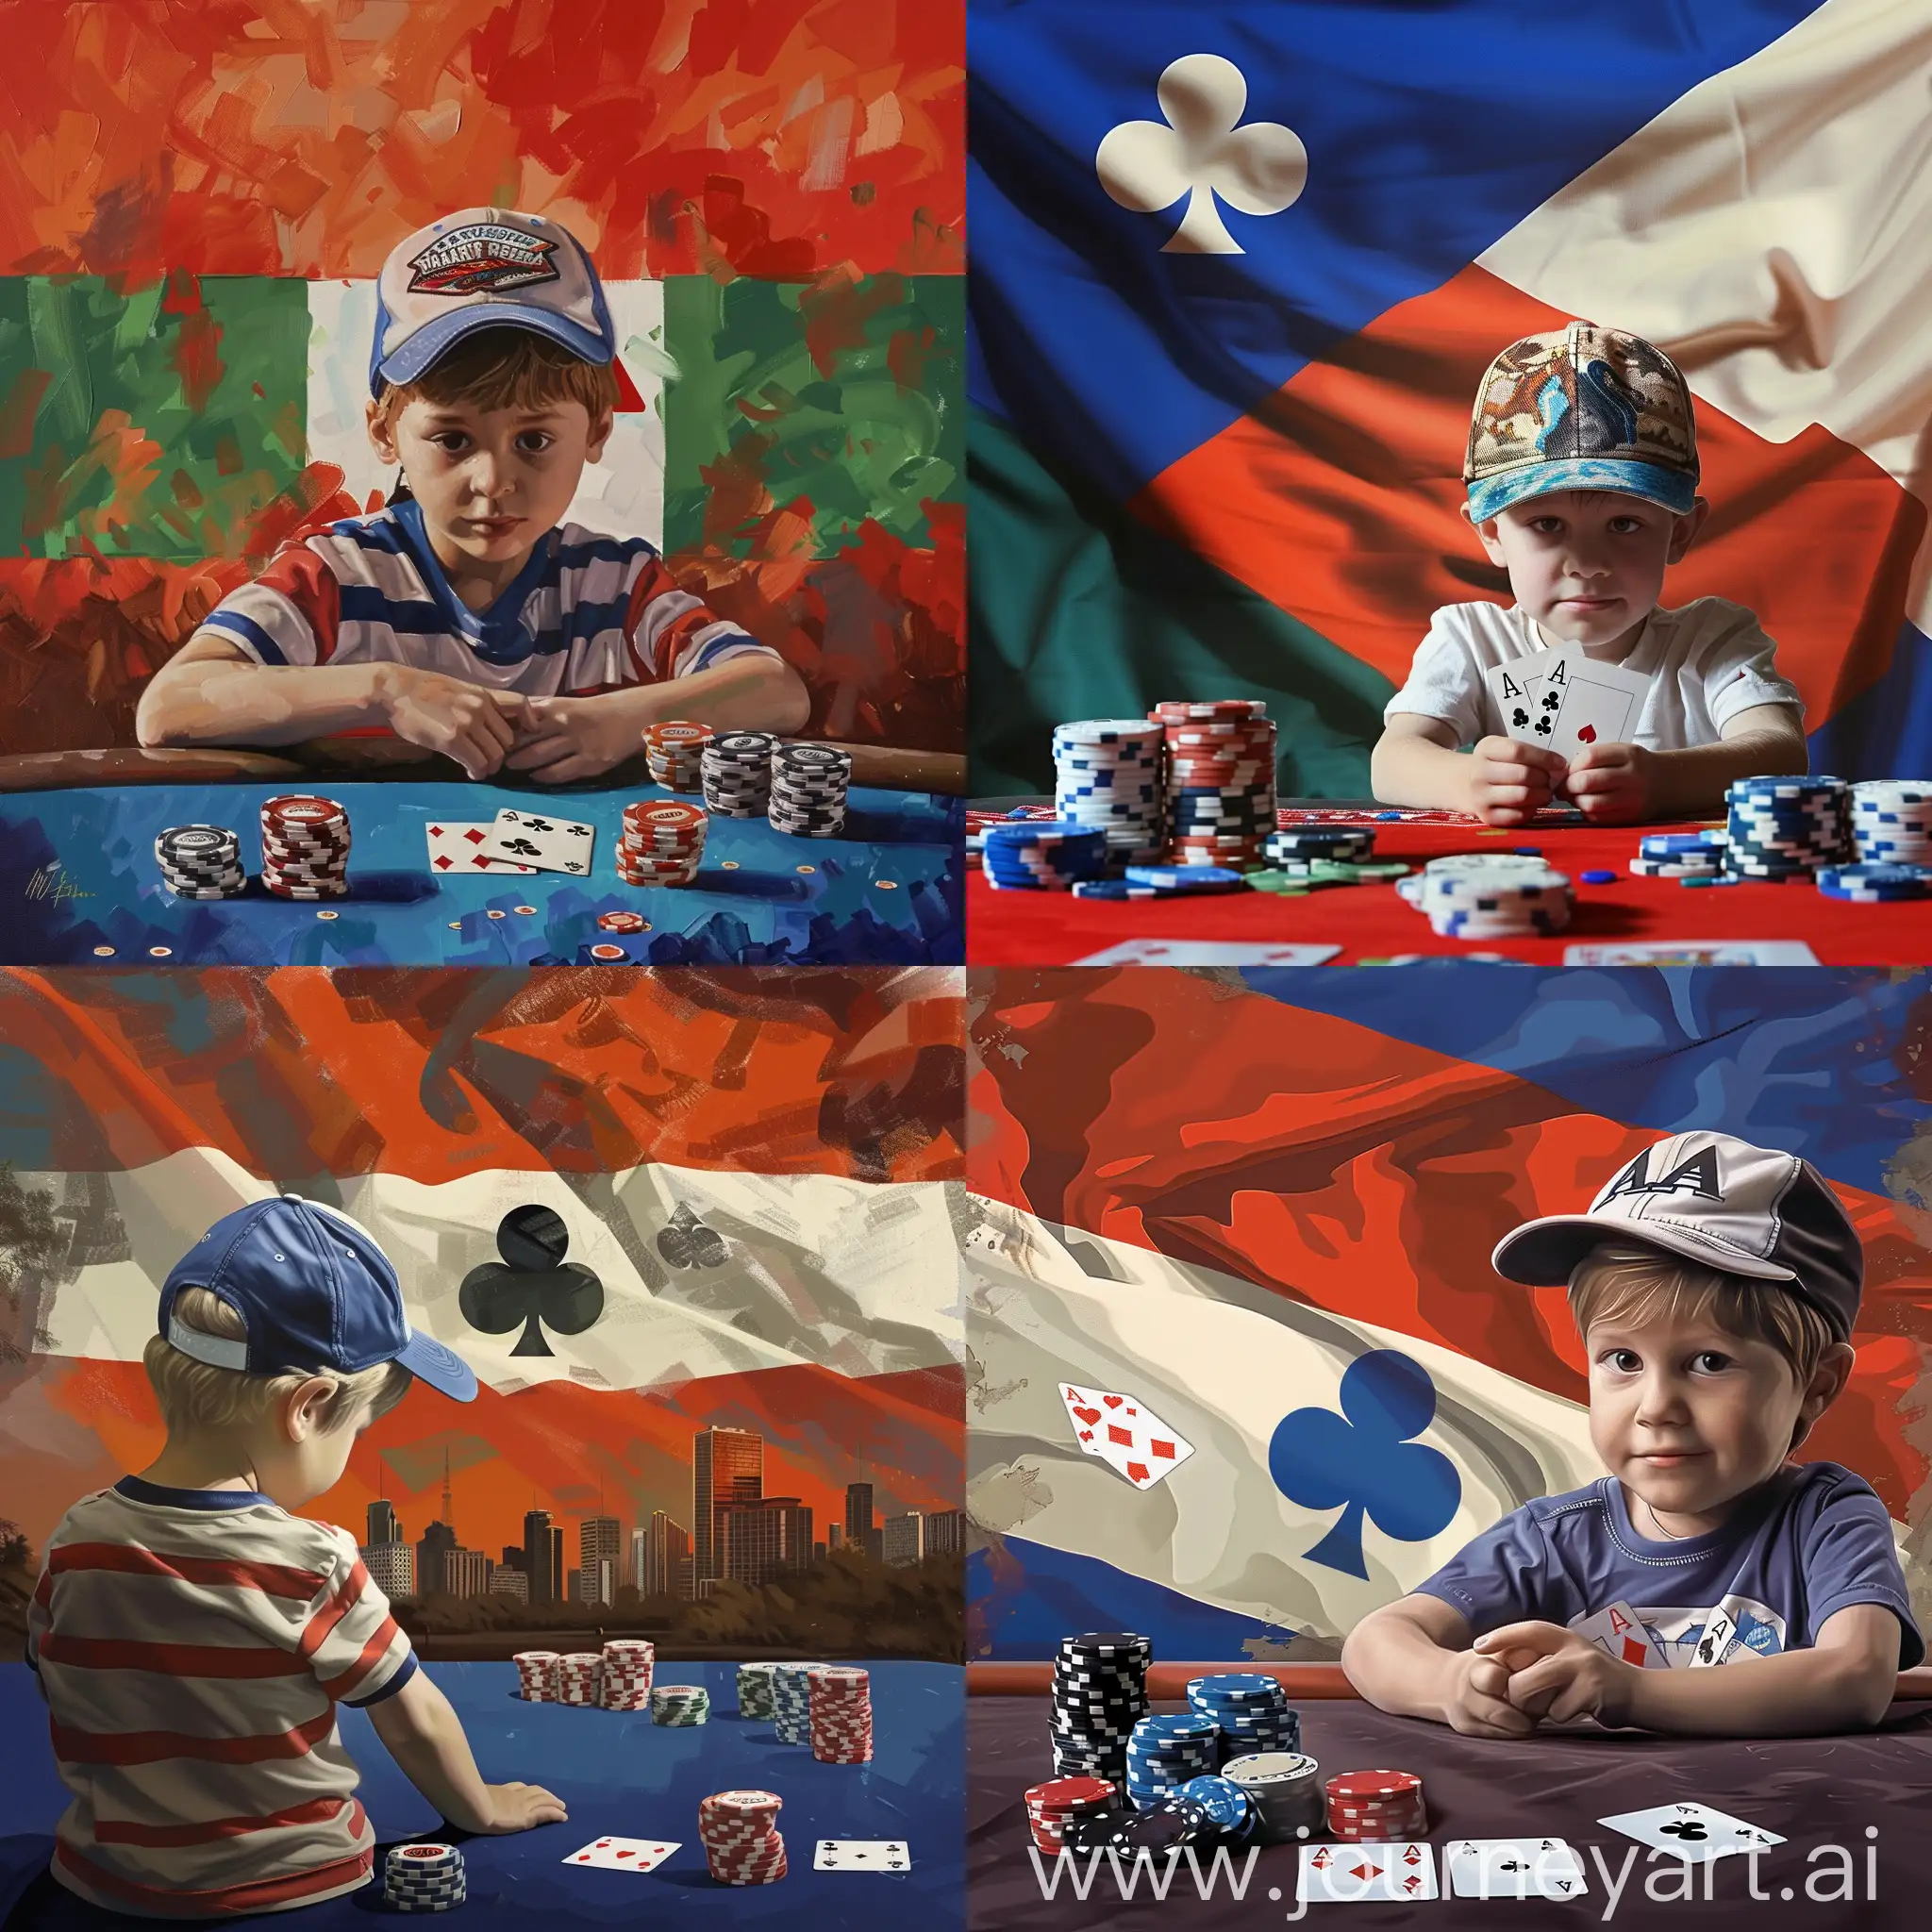 create an image of a Paraguay flag in the background in the centre of Asuncion with a young boy sat a poker table with two aces and loads of chips with a baseball cap on